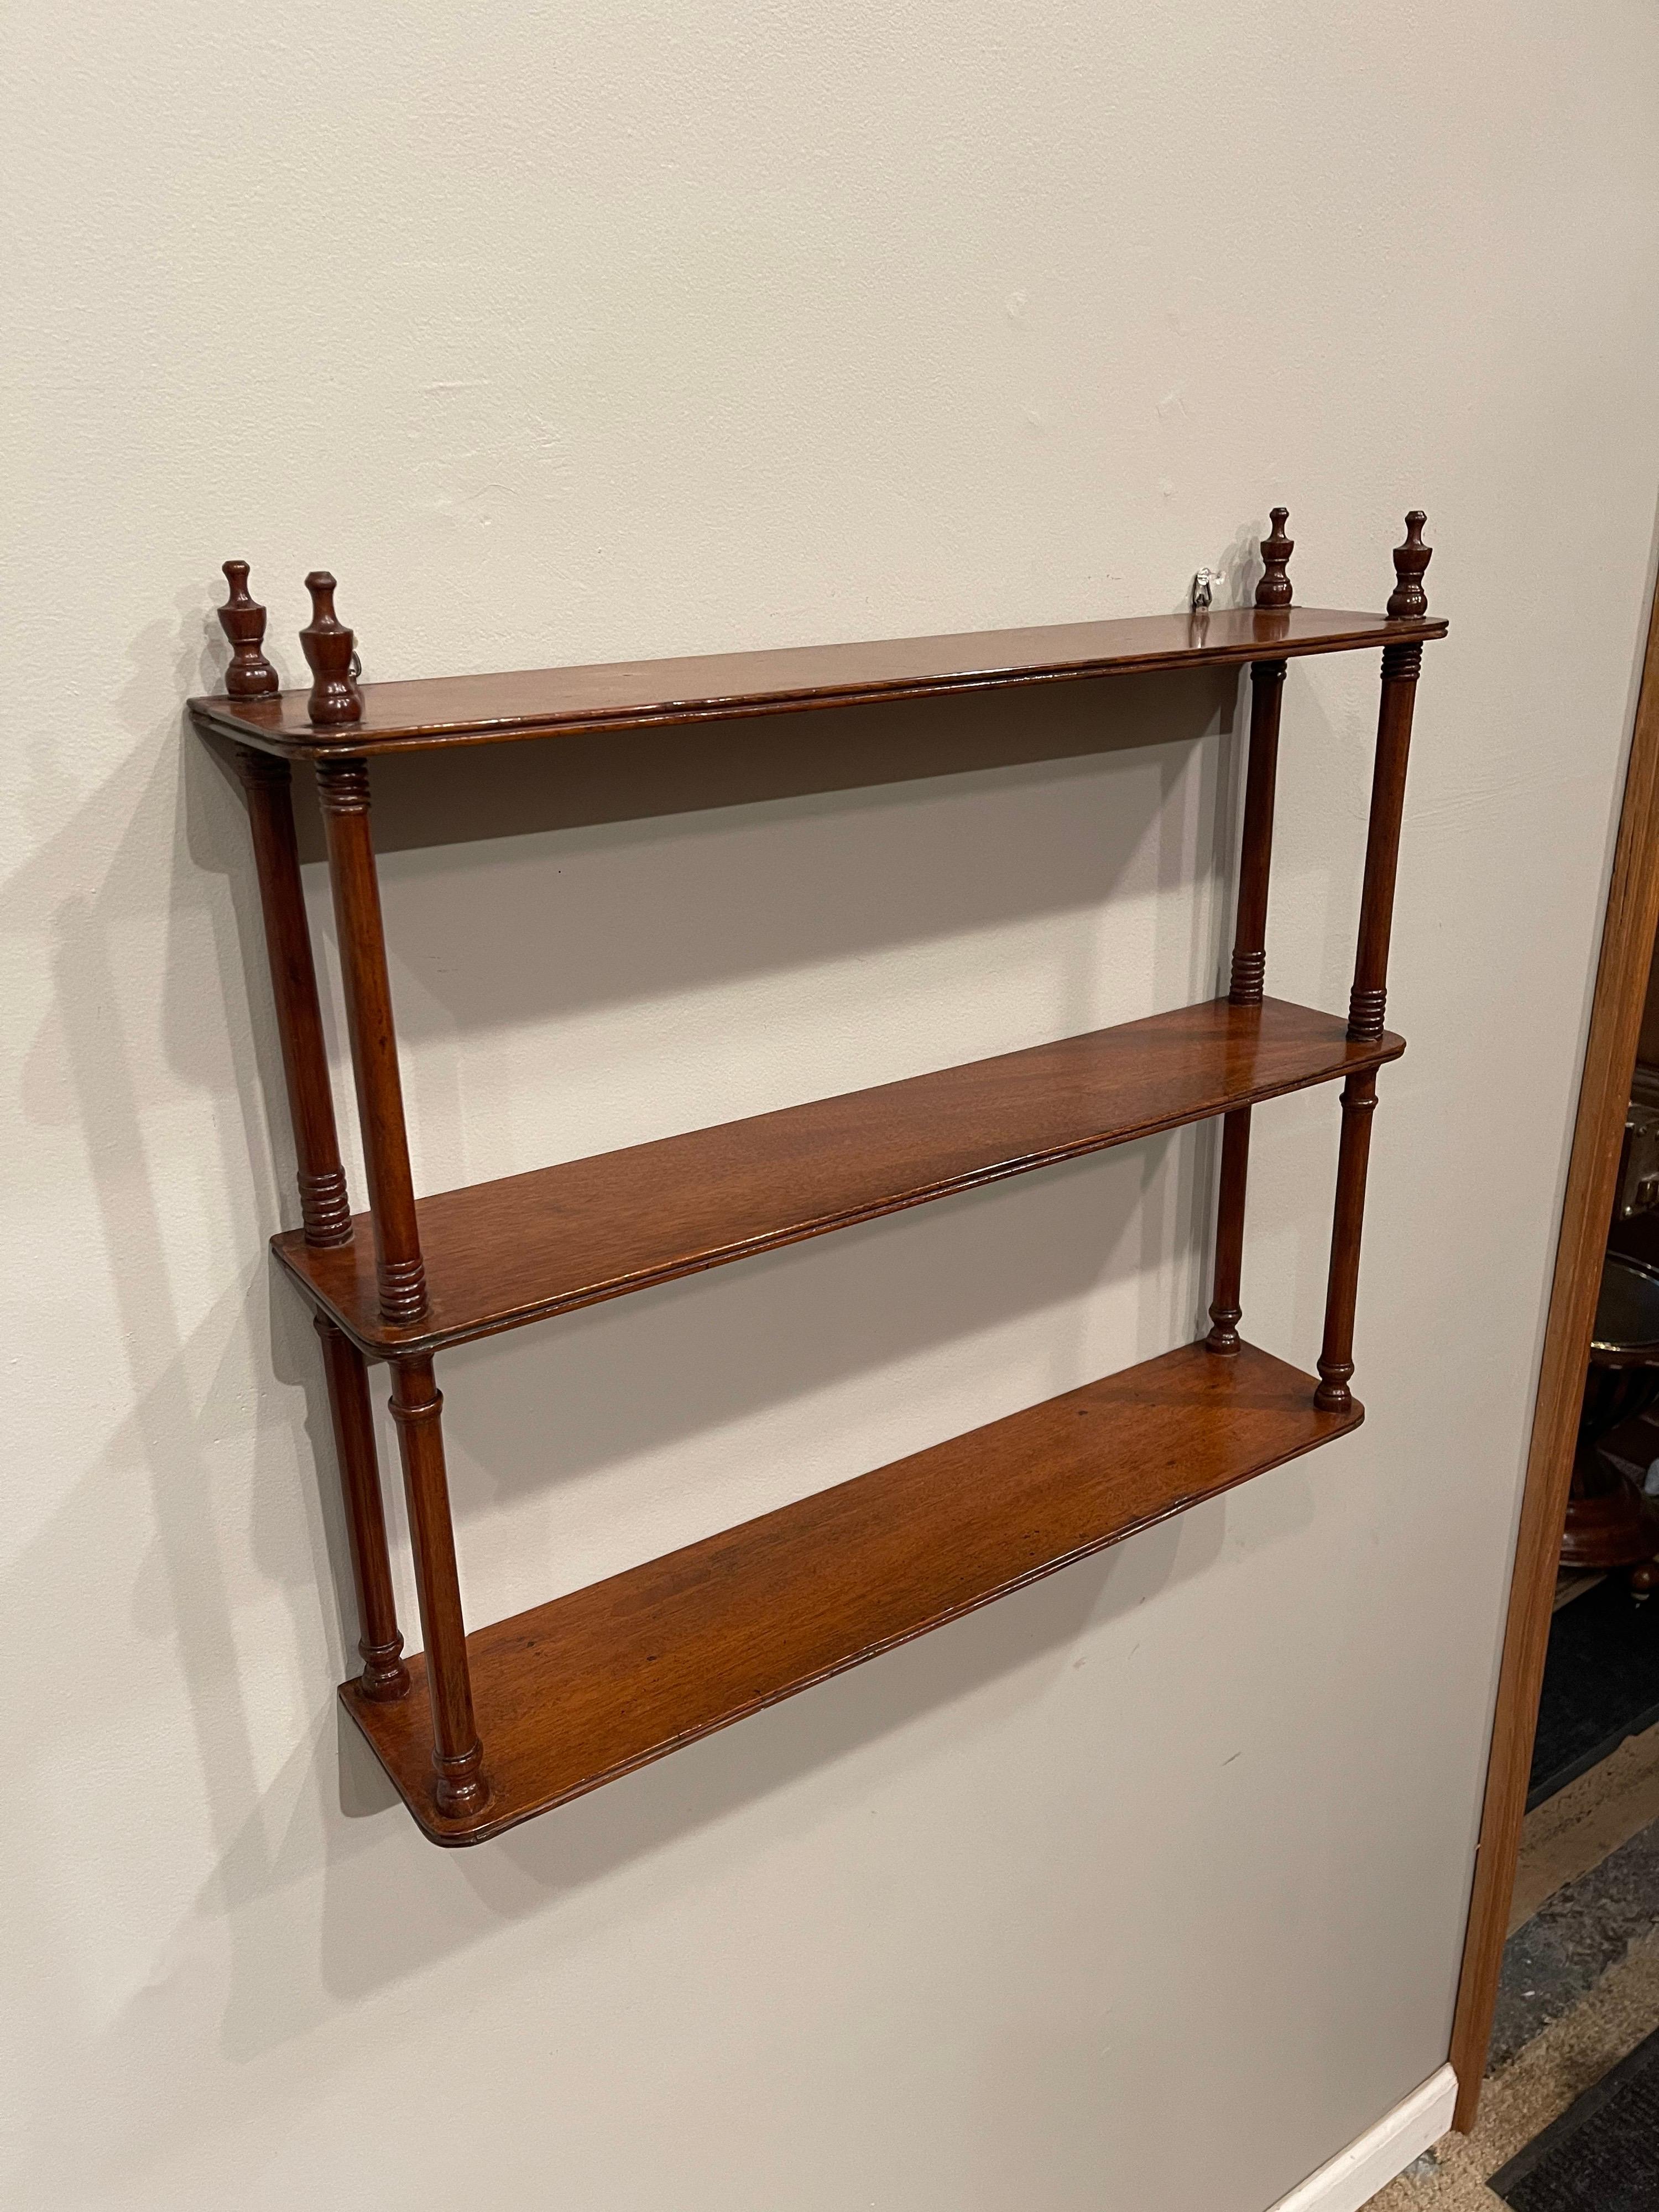 Small mahogany hanging wall shelf. 
Cleaned & tighten. Touched up & polished ready for use.